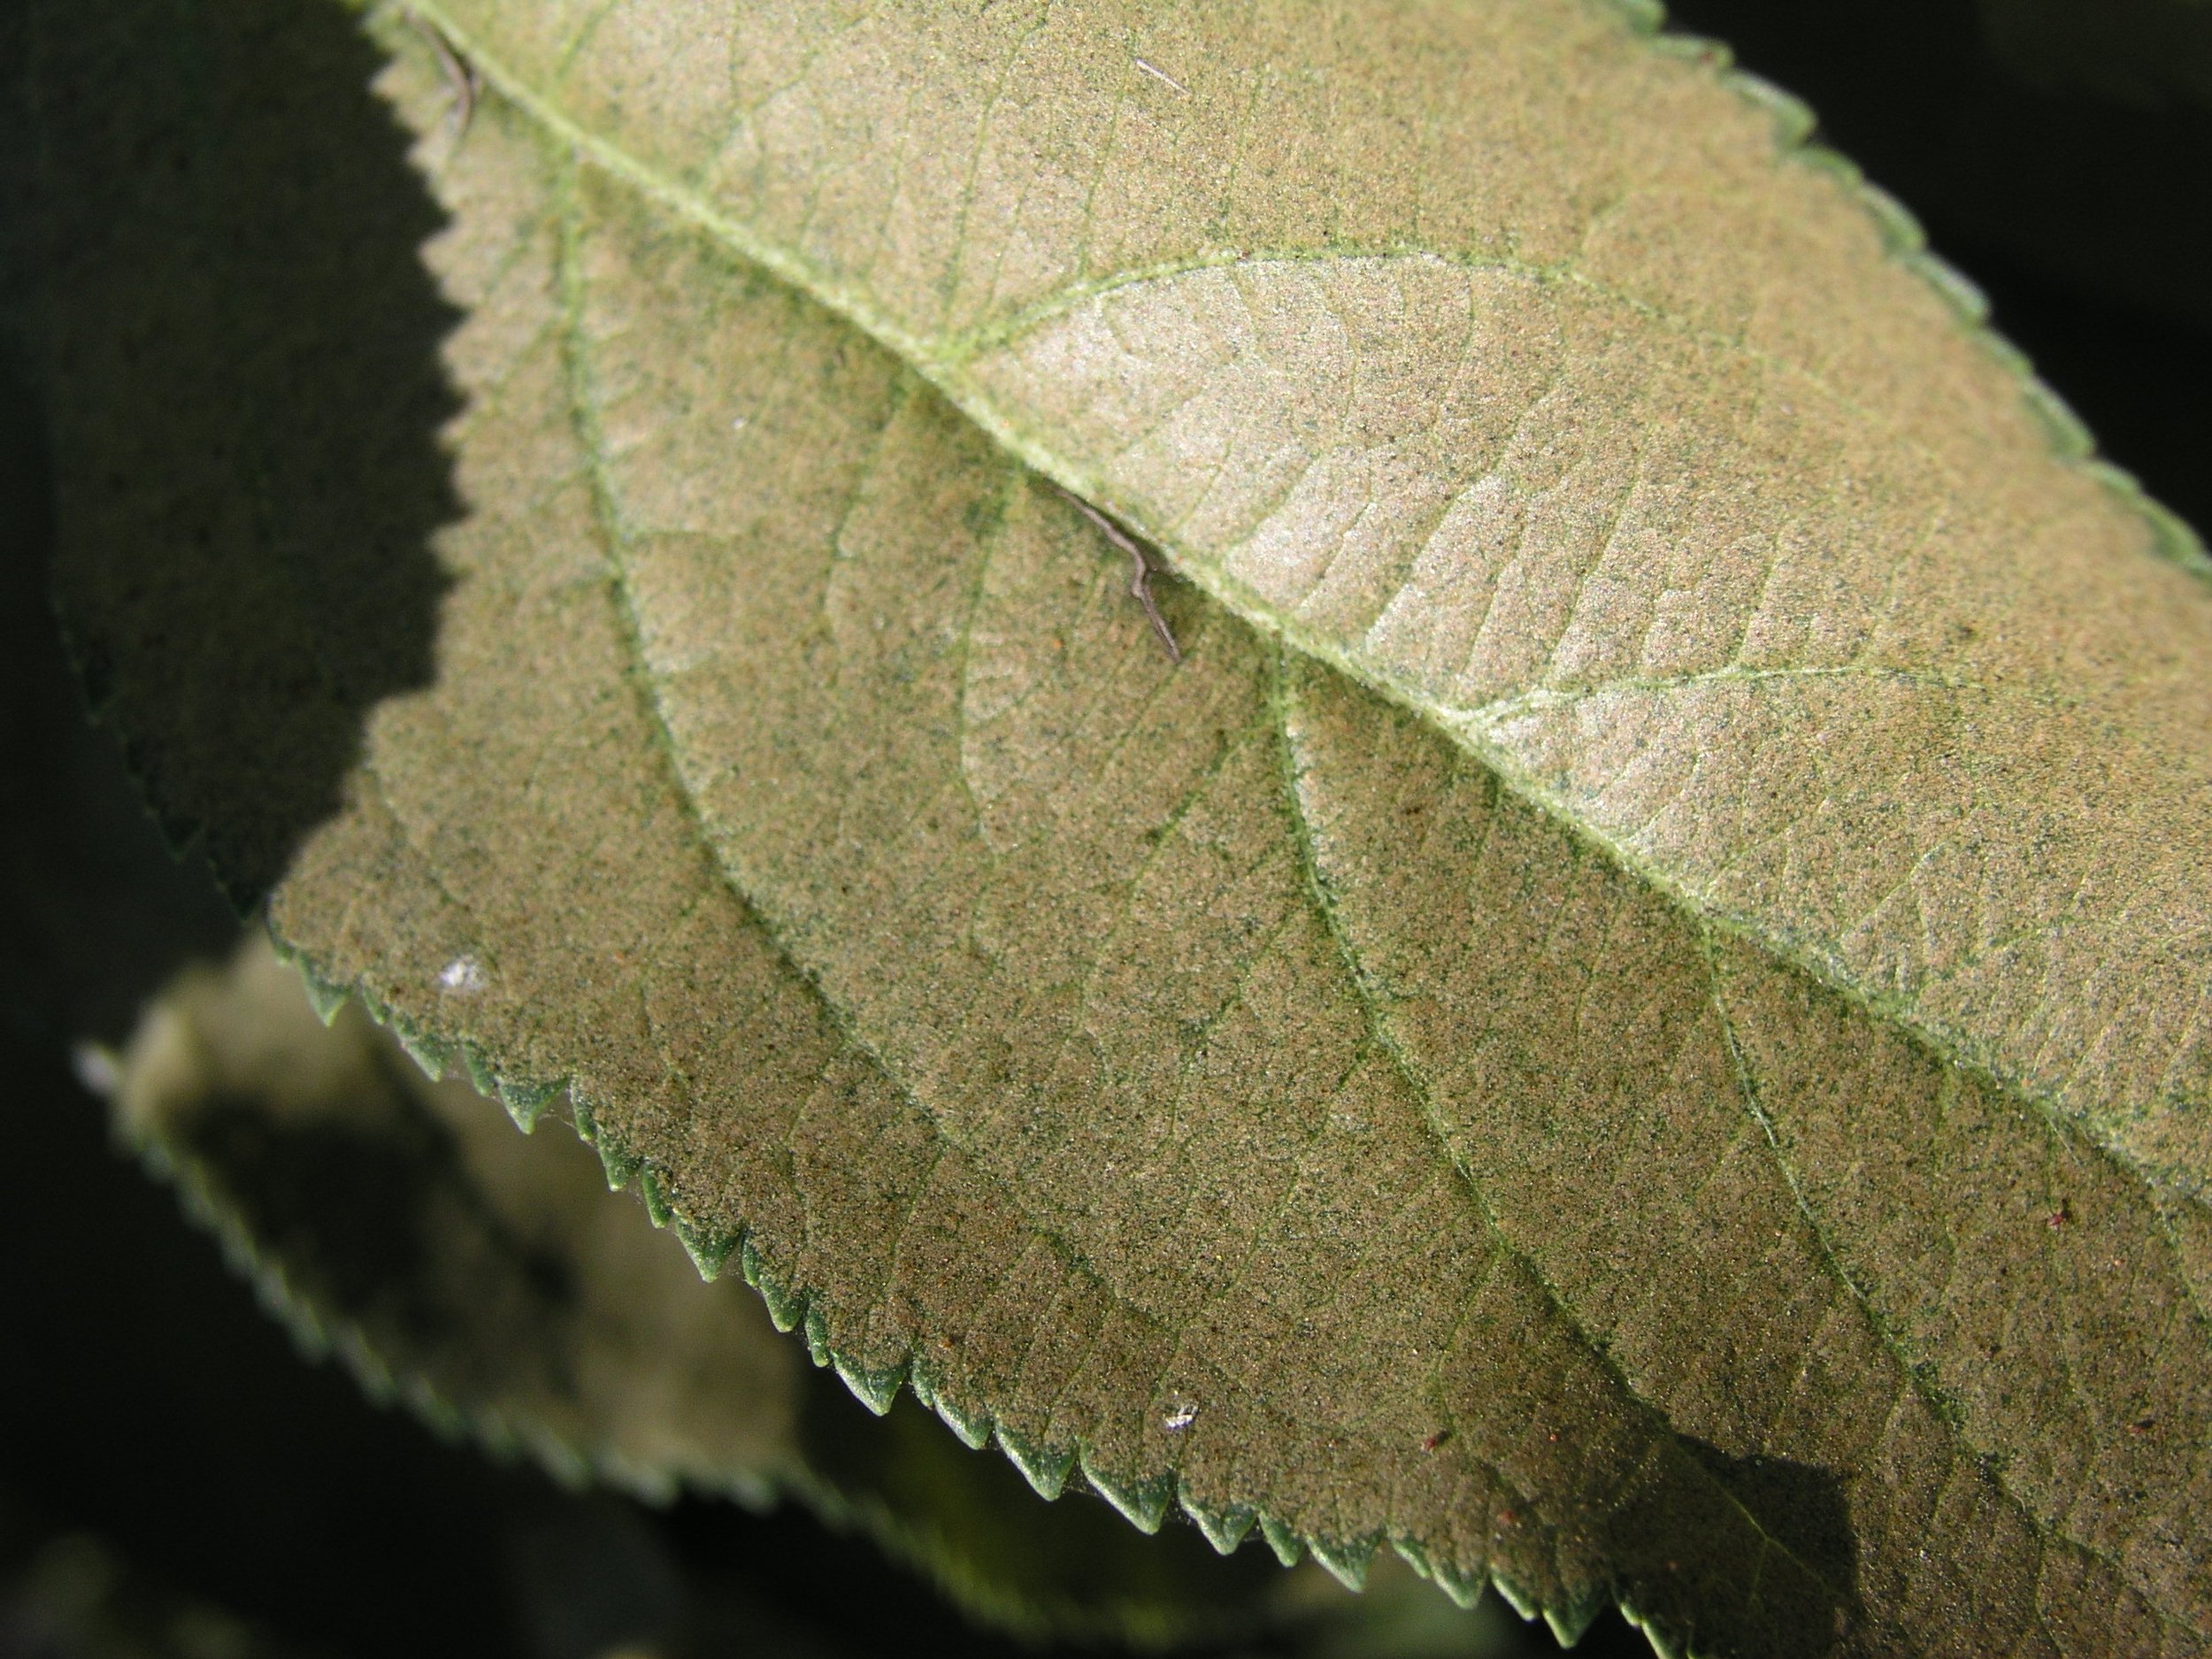 Two Spotted Spider Mite